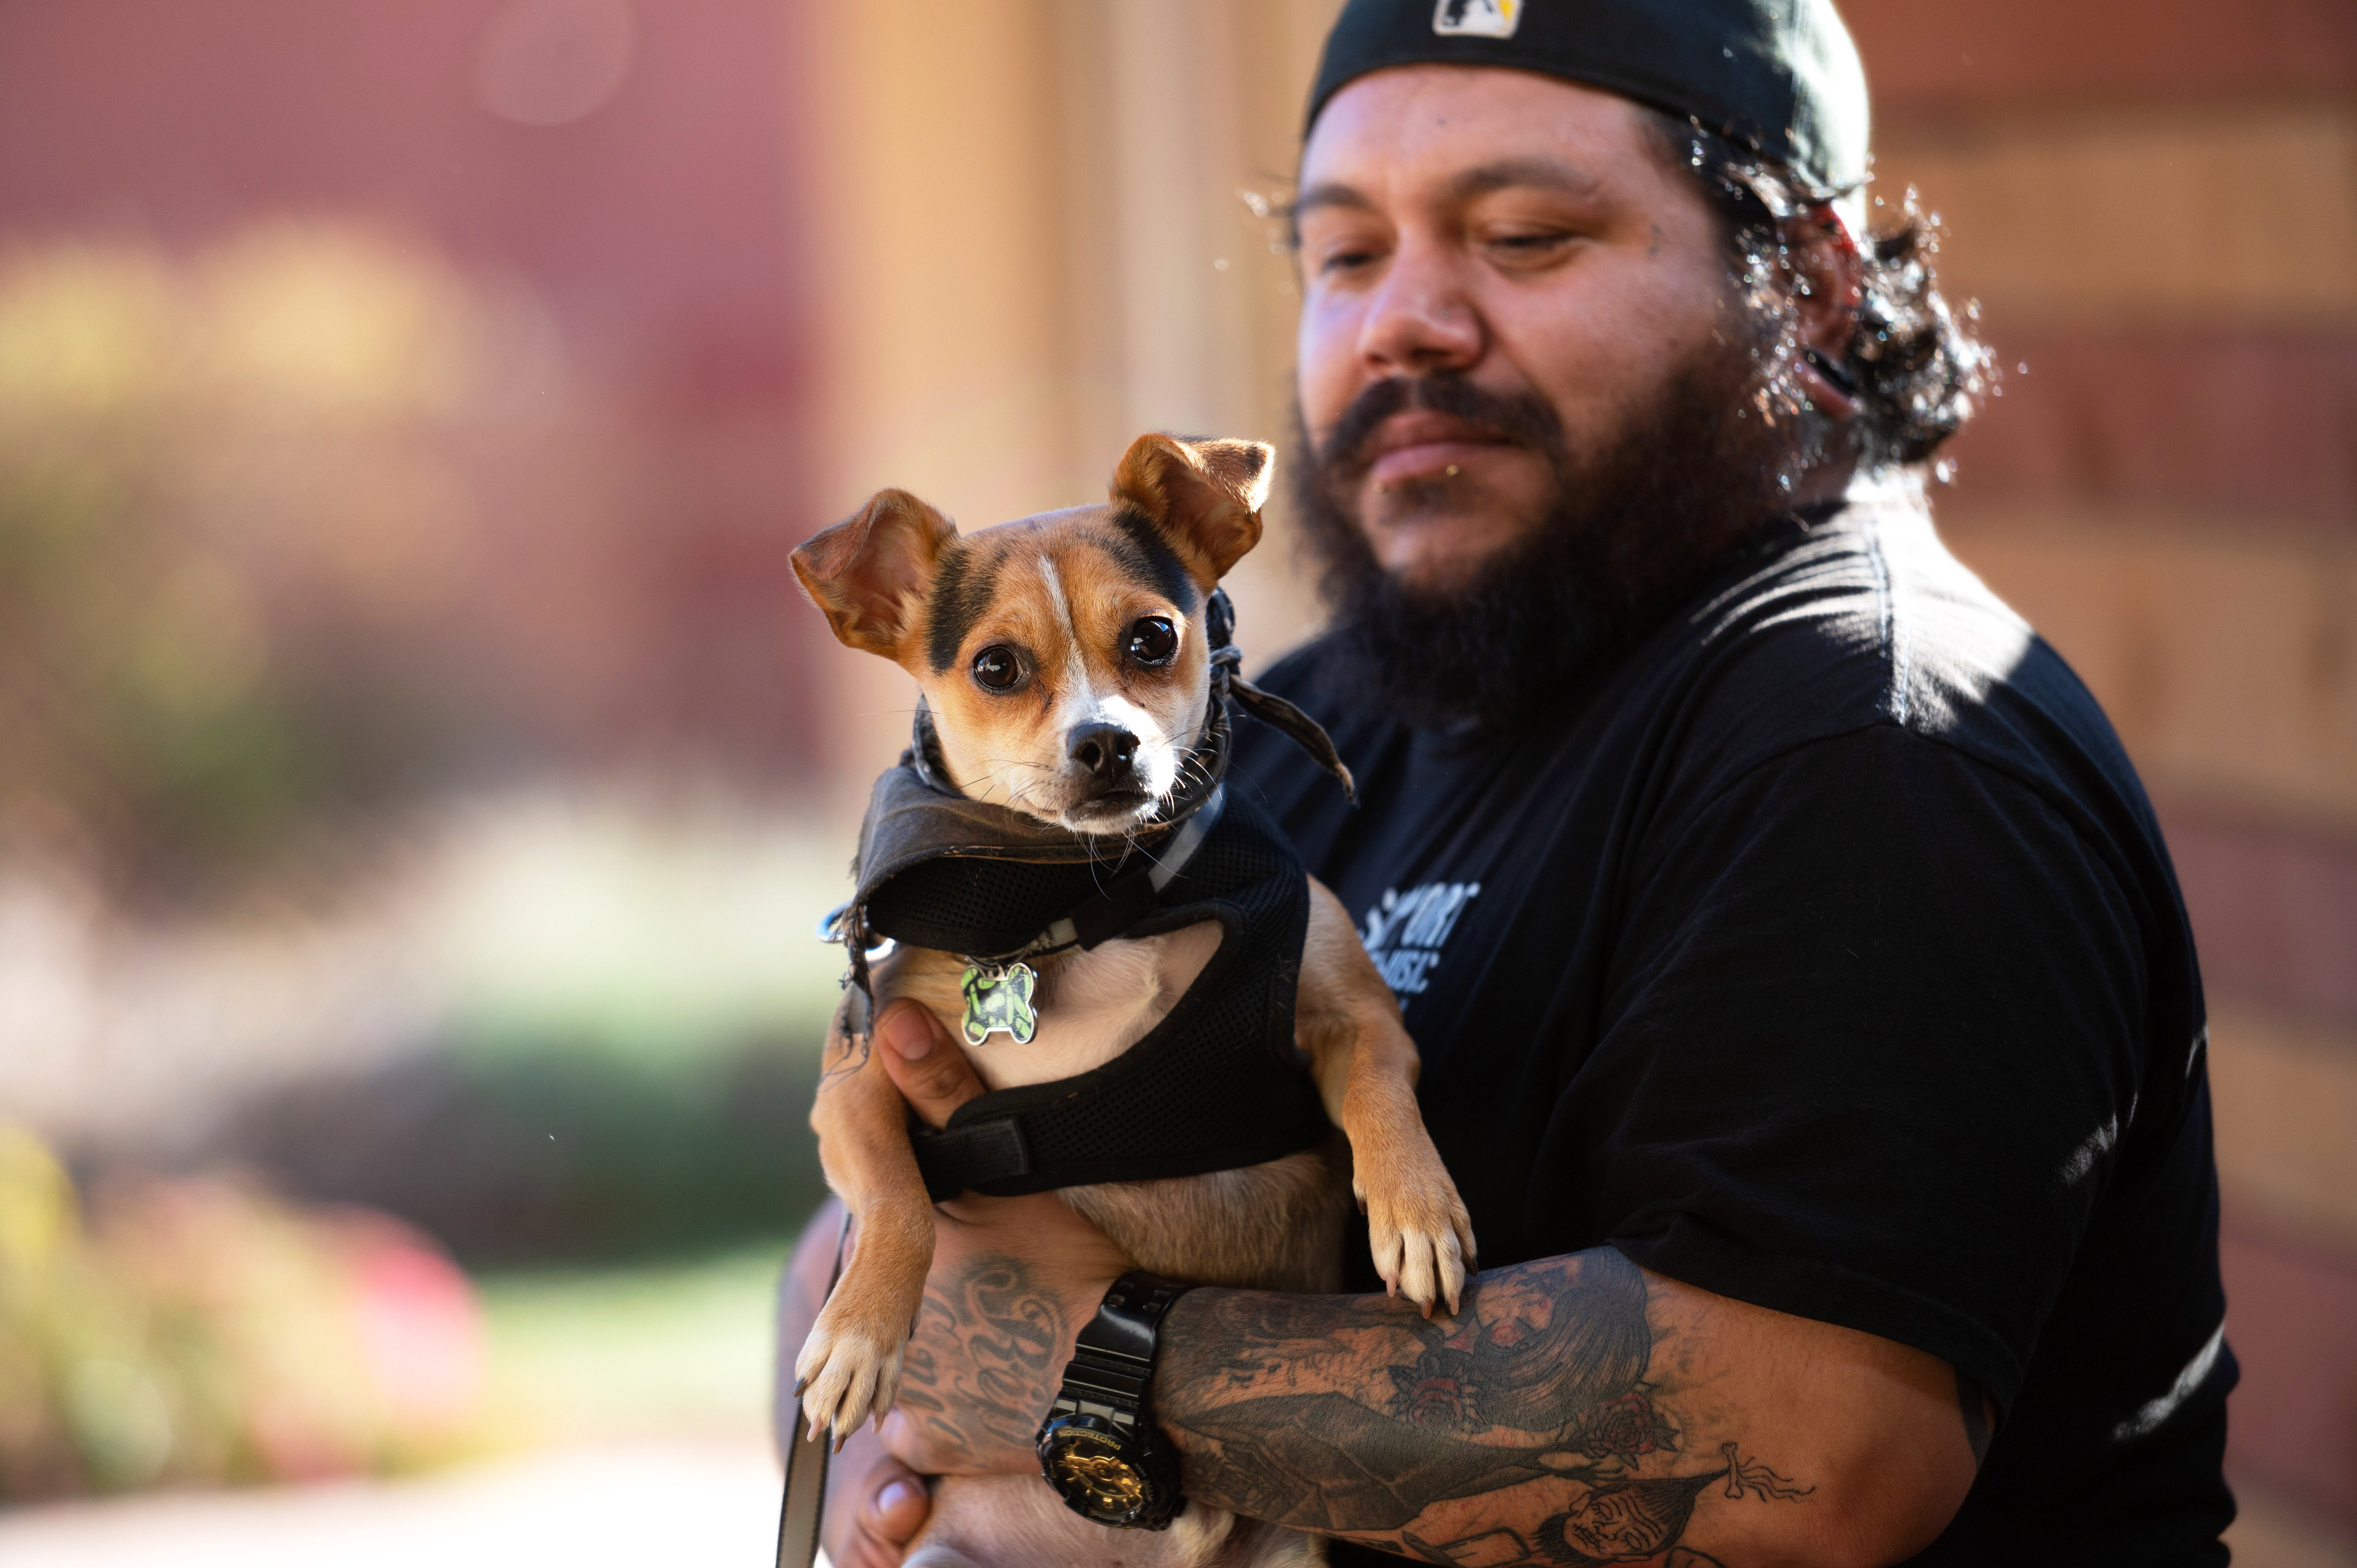 Man wearing backwards hat holding a small dog who is wearing a harness